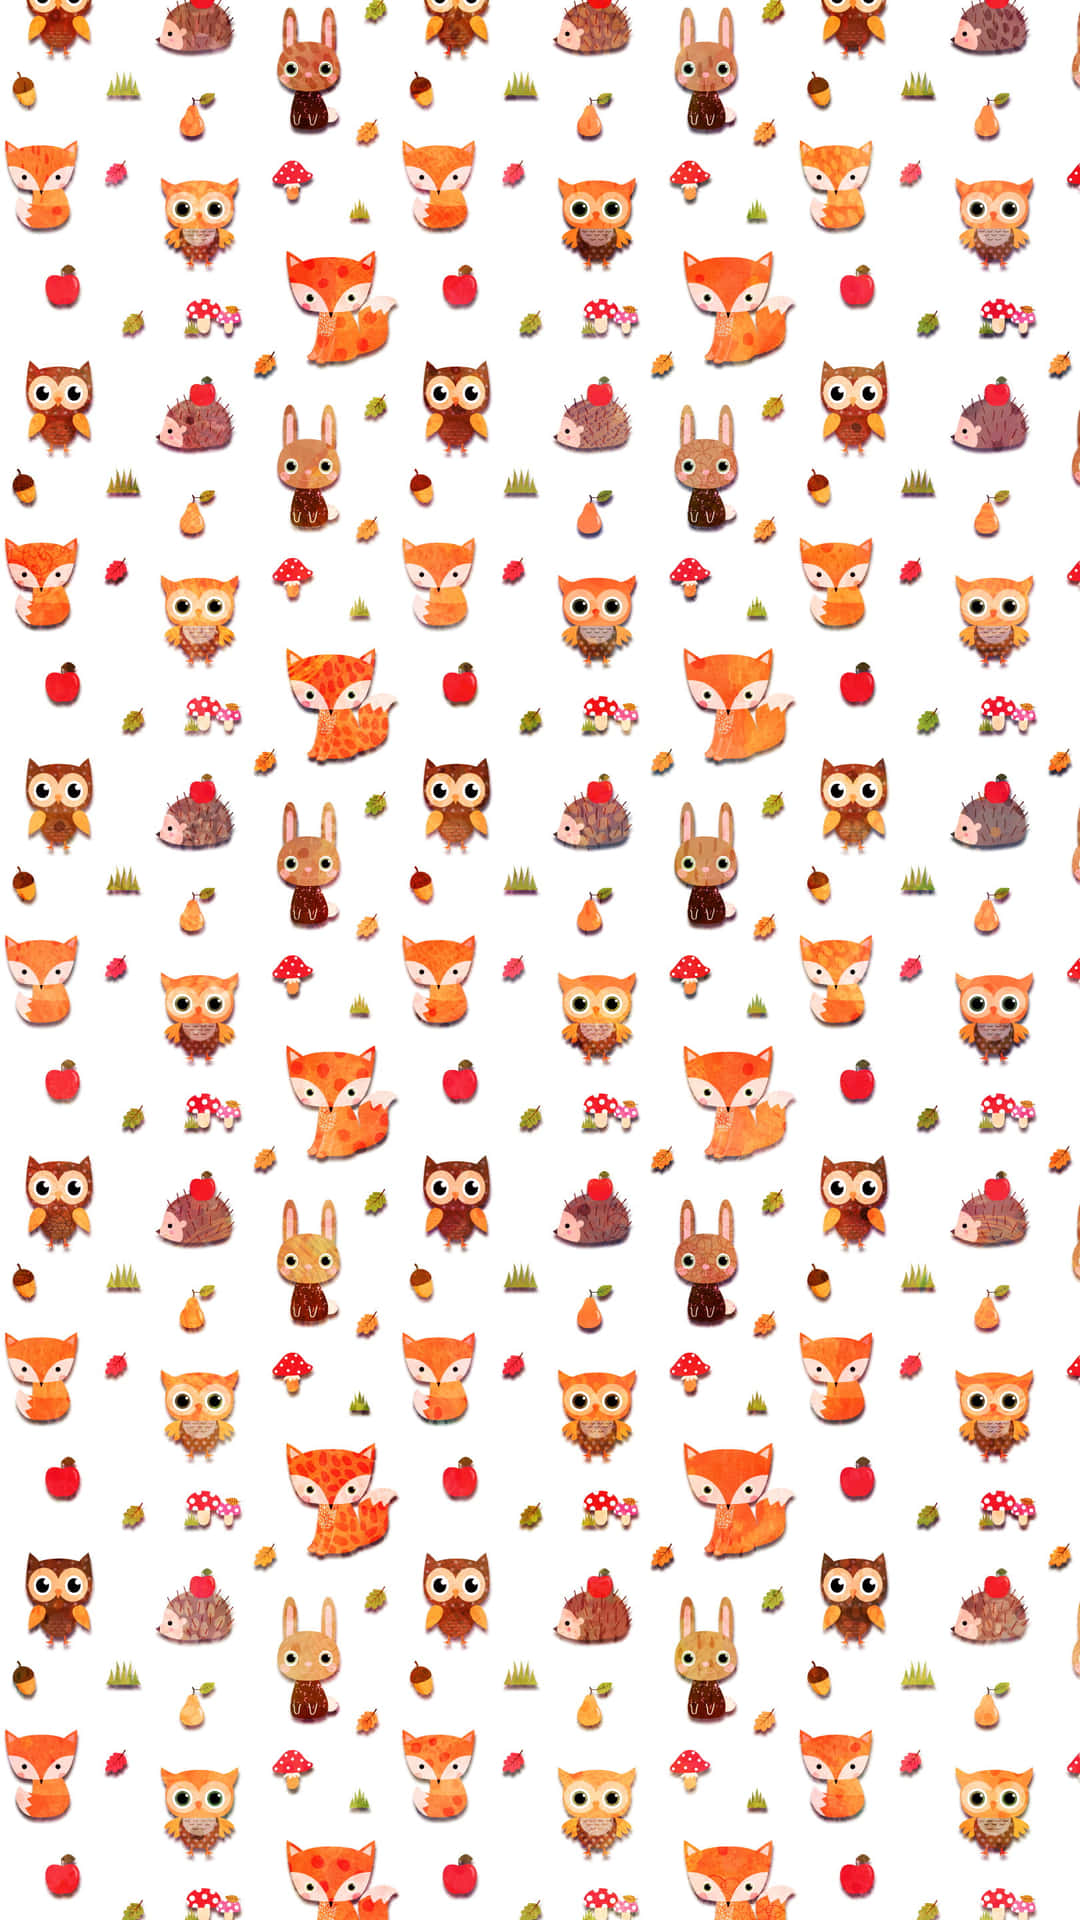 A Kawaii Fox happily exploring the colorful forest. Wallpaper